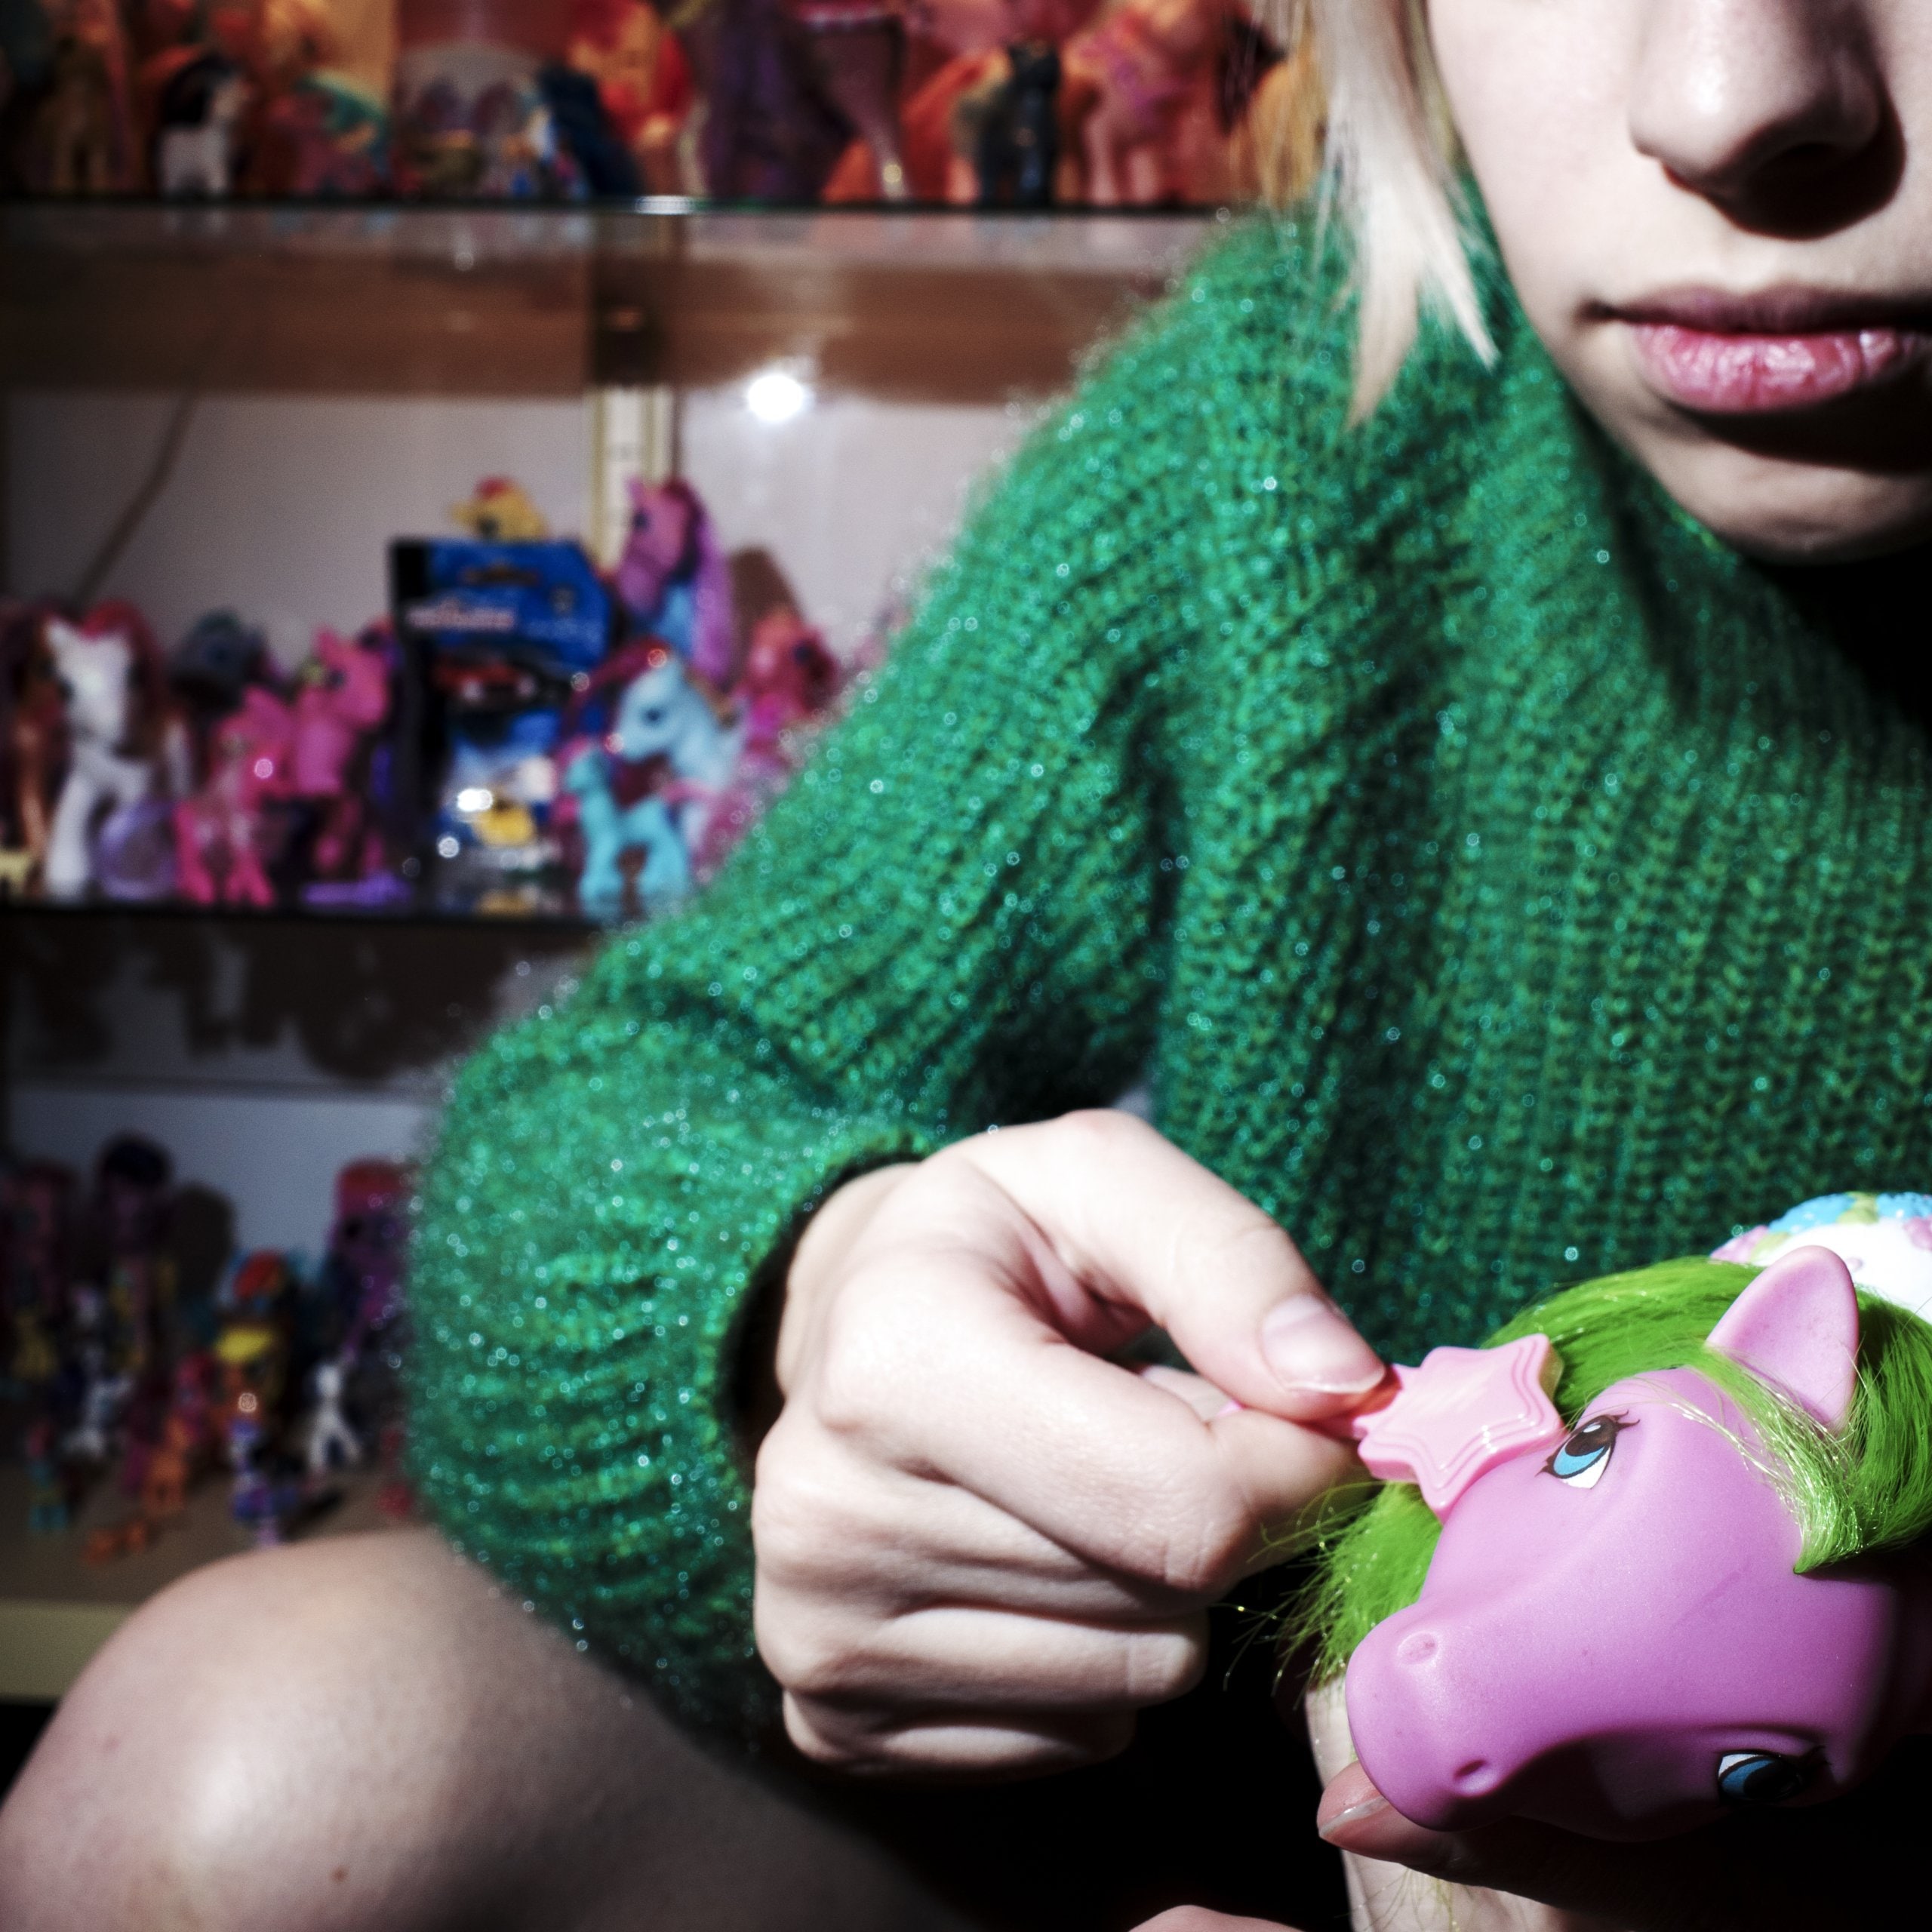 Toma's girlfriend brushing the green hair of a pink My little pony, behind her is shelves full of more My little ponies.